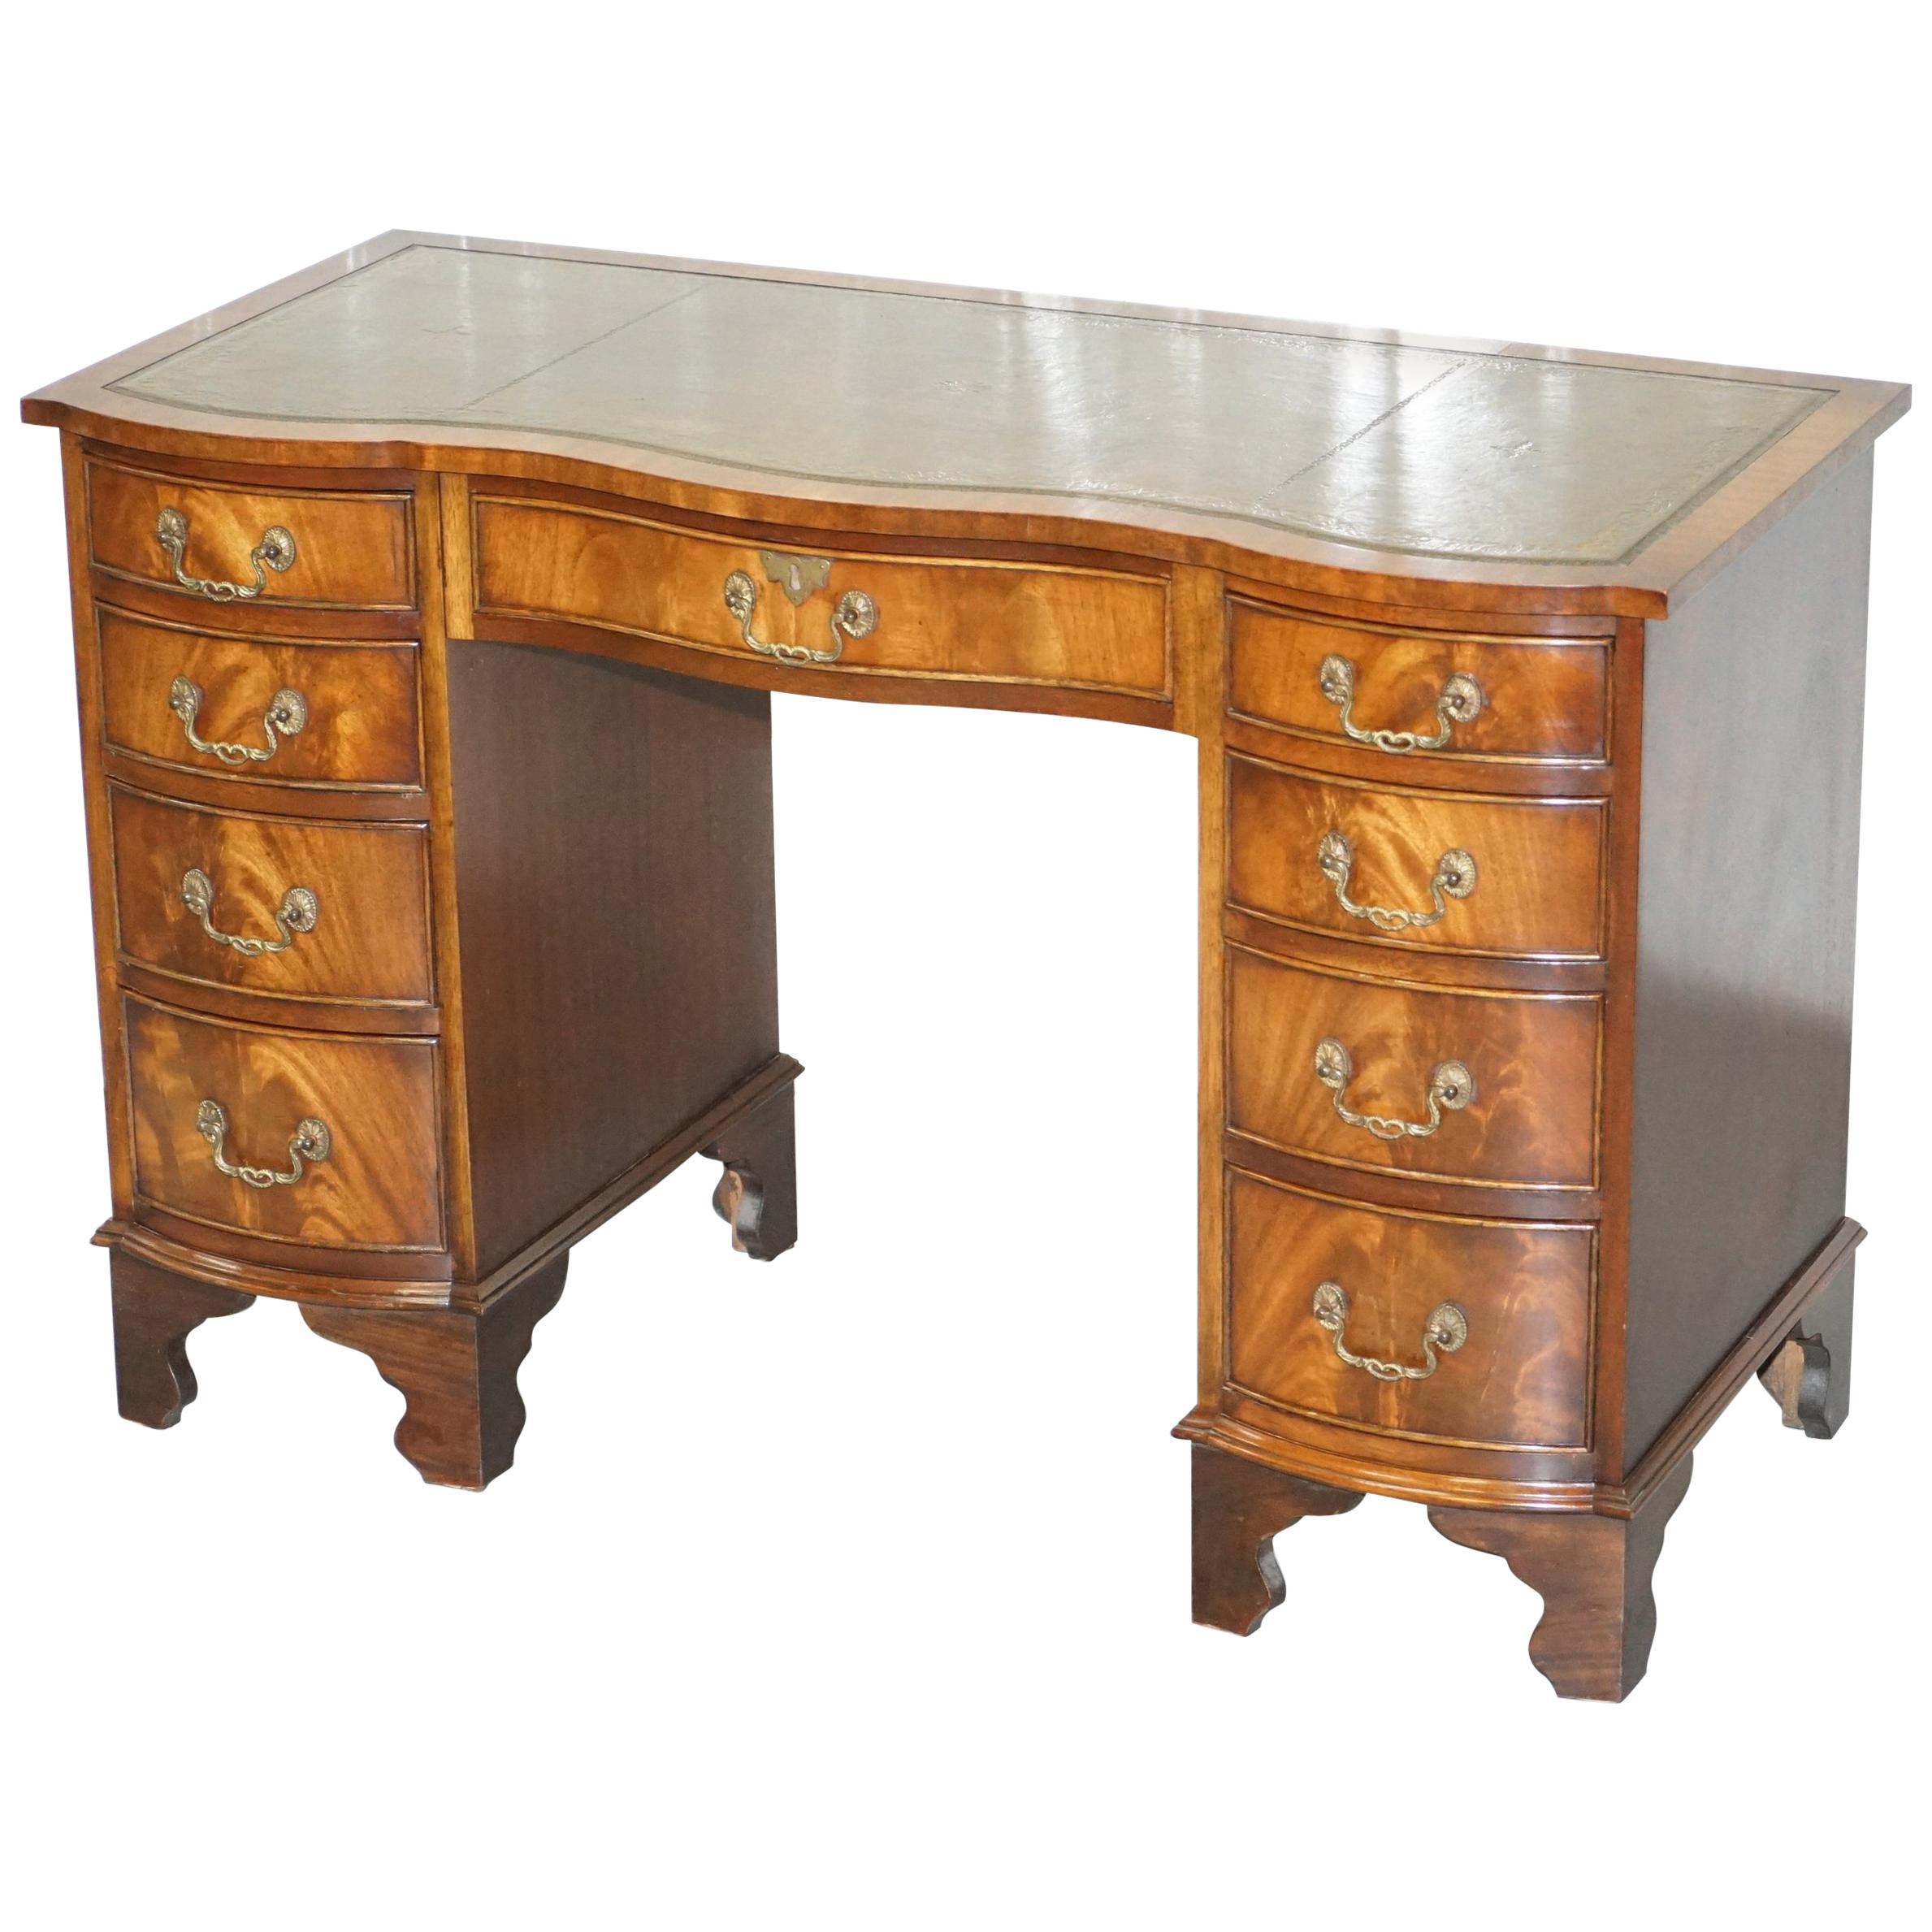 Rare Serpentine Fronted Flamed Mahogany Leather Top Twin Pedestal Partner Desk